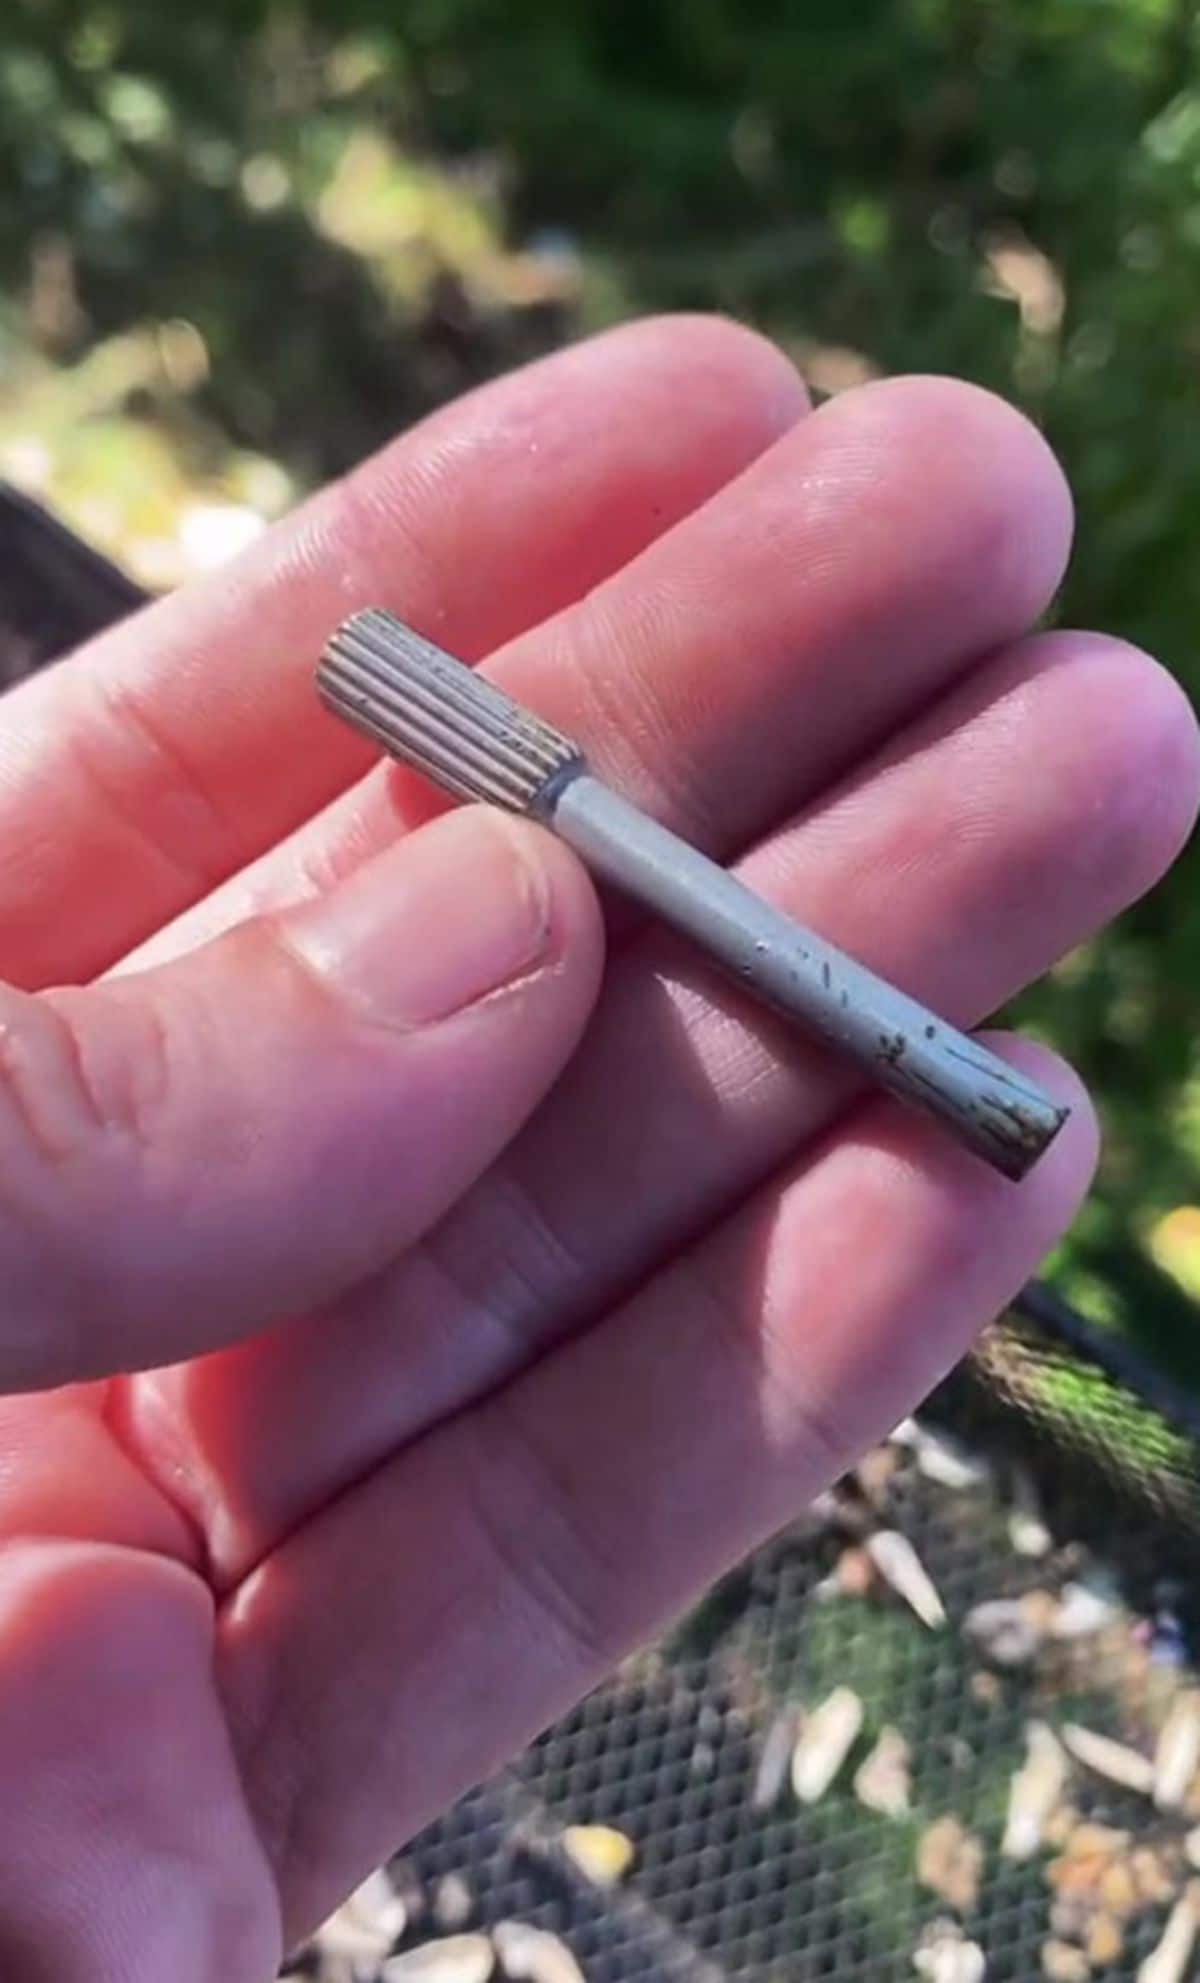 a small grey metal item held in someone's hand